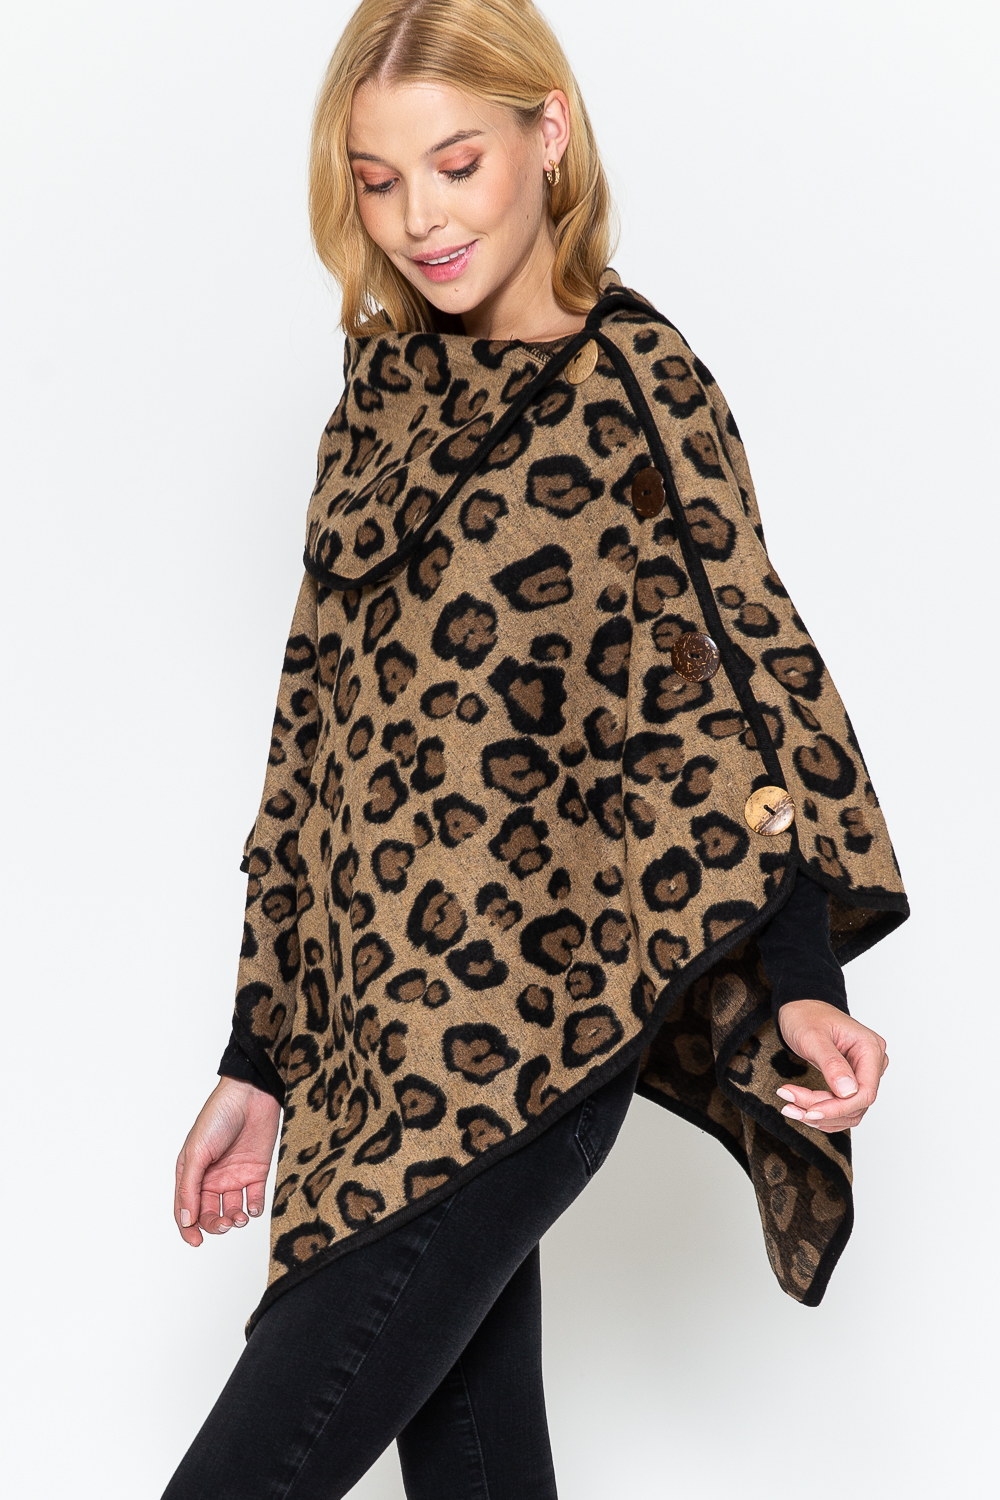 Leopard Print Poncho, Buttoned Collar, Stay warm and hip